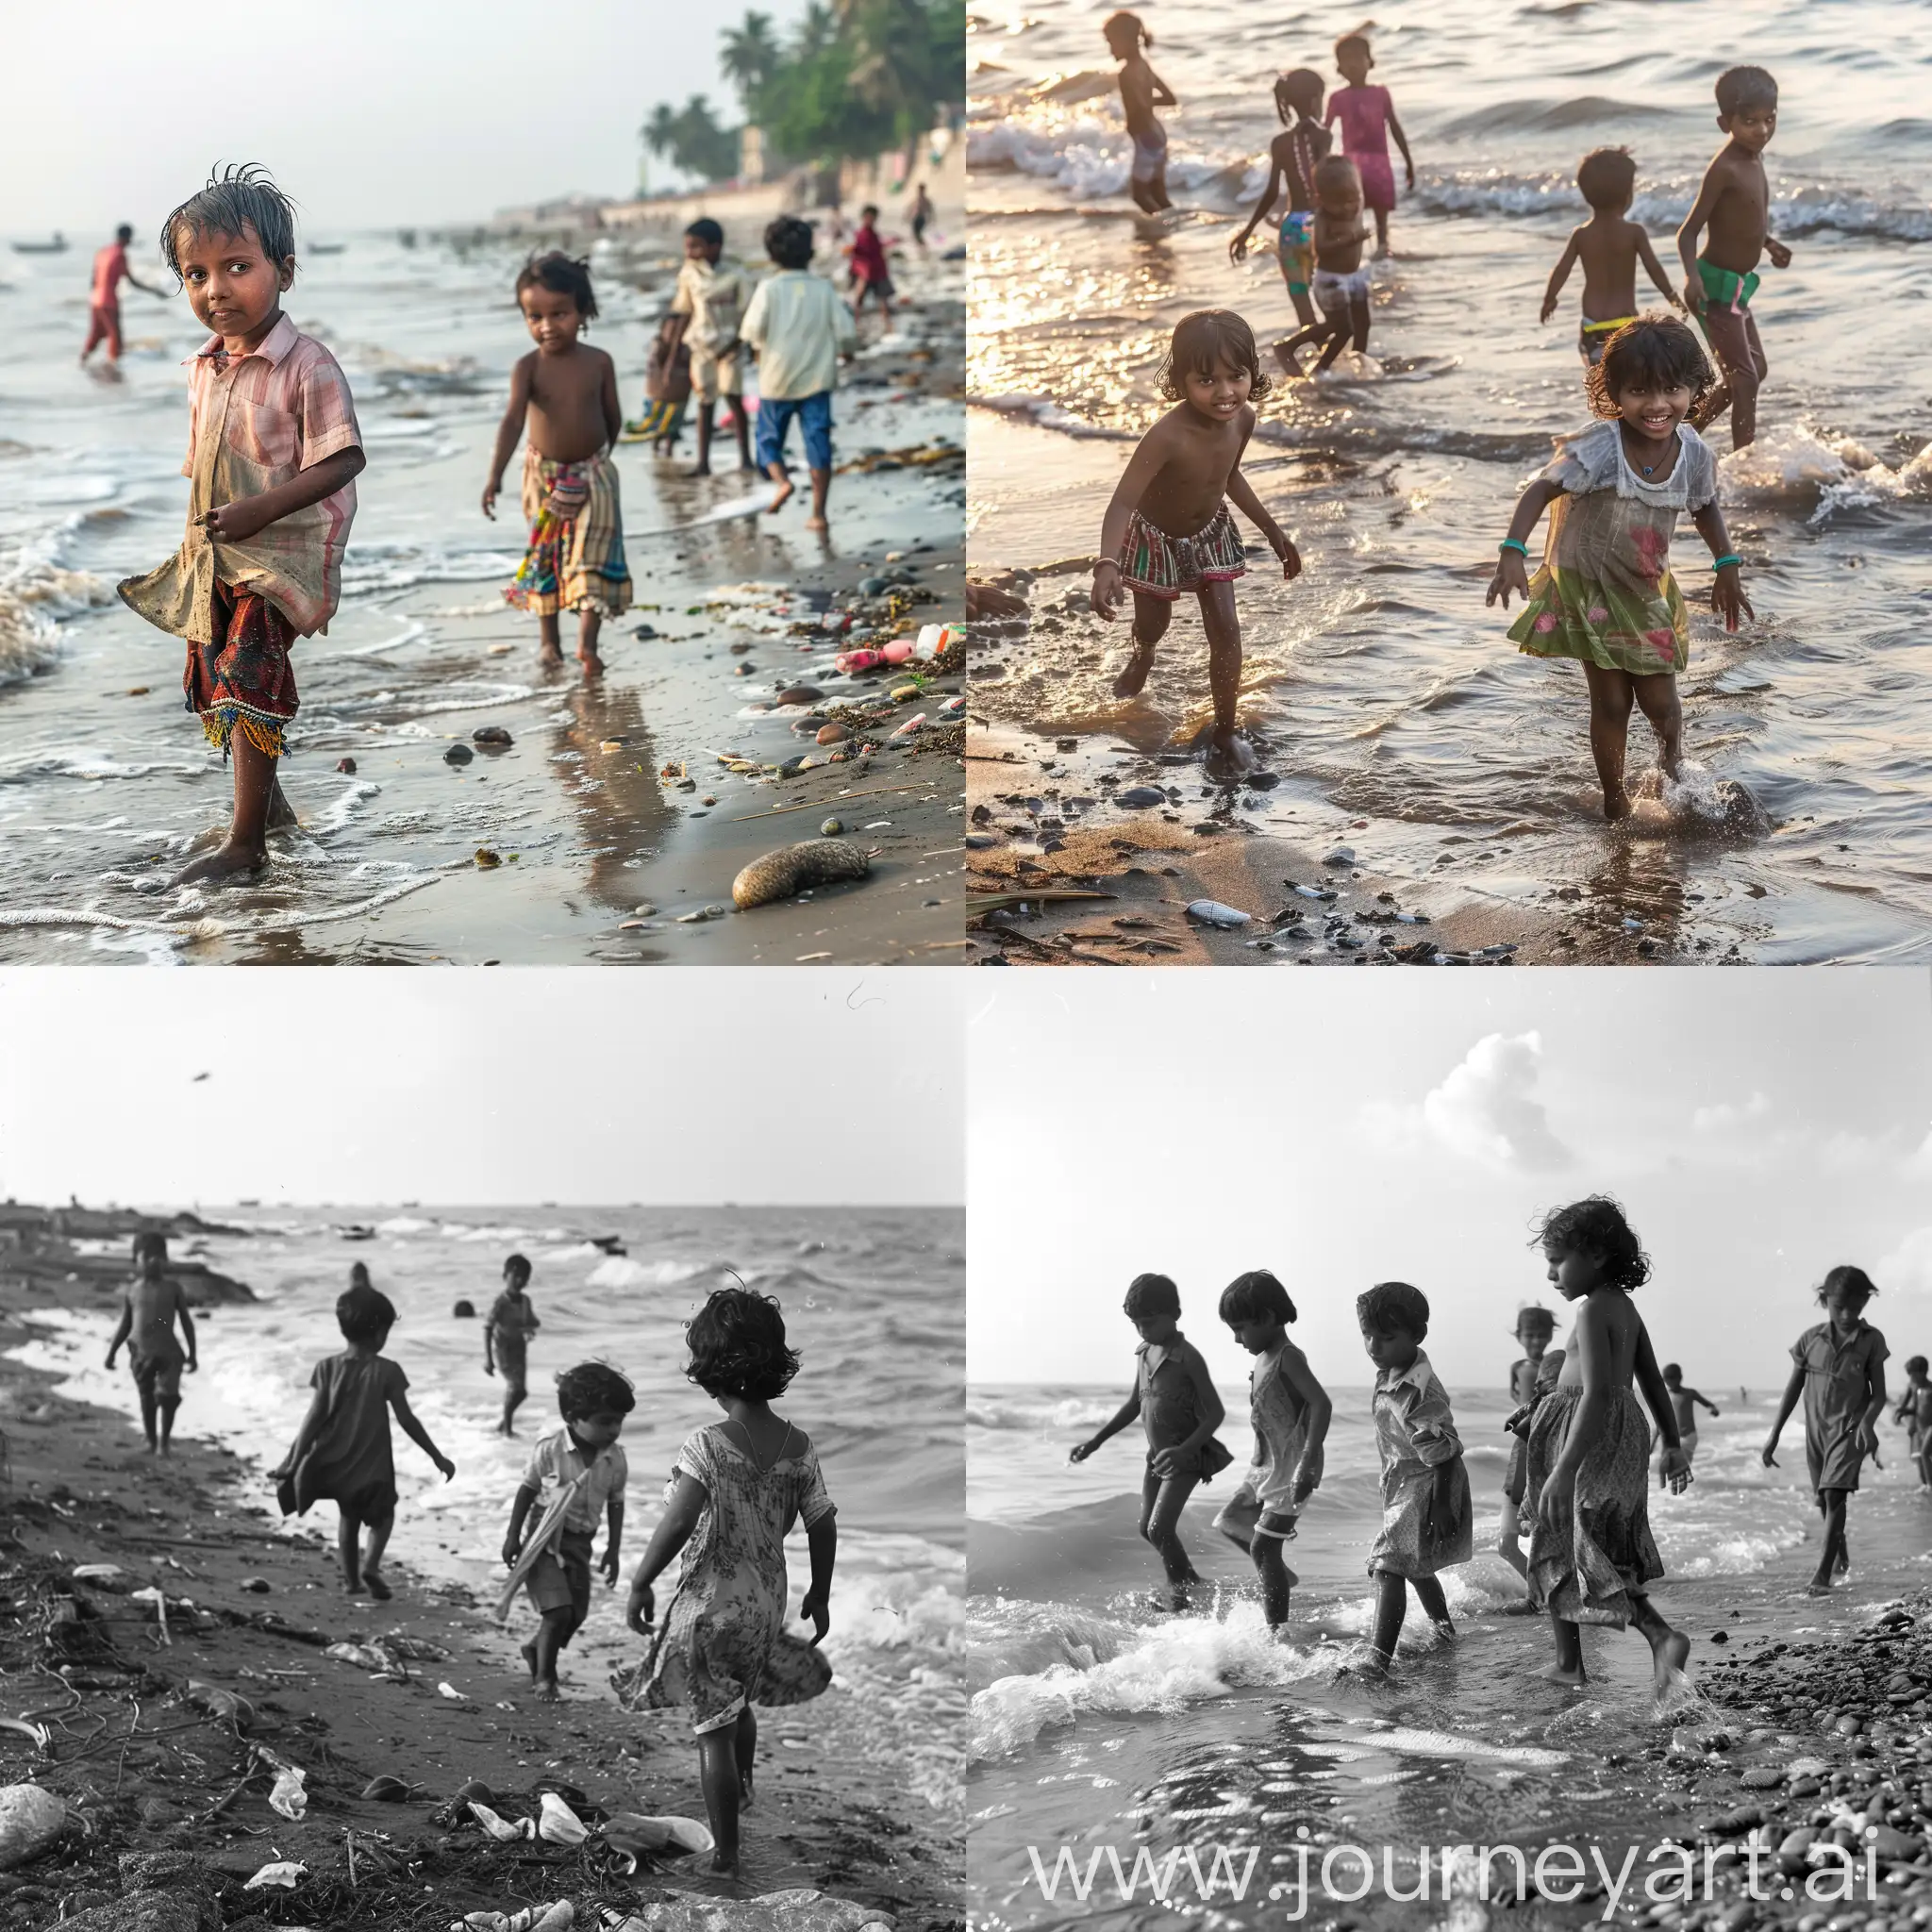 children walking on the sea shore in the poor clothes playing all around and seeking some fun